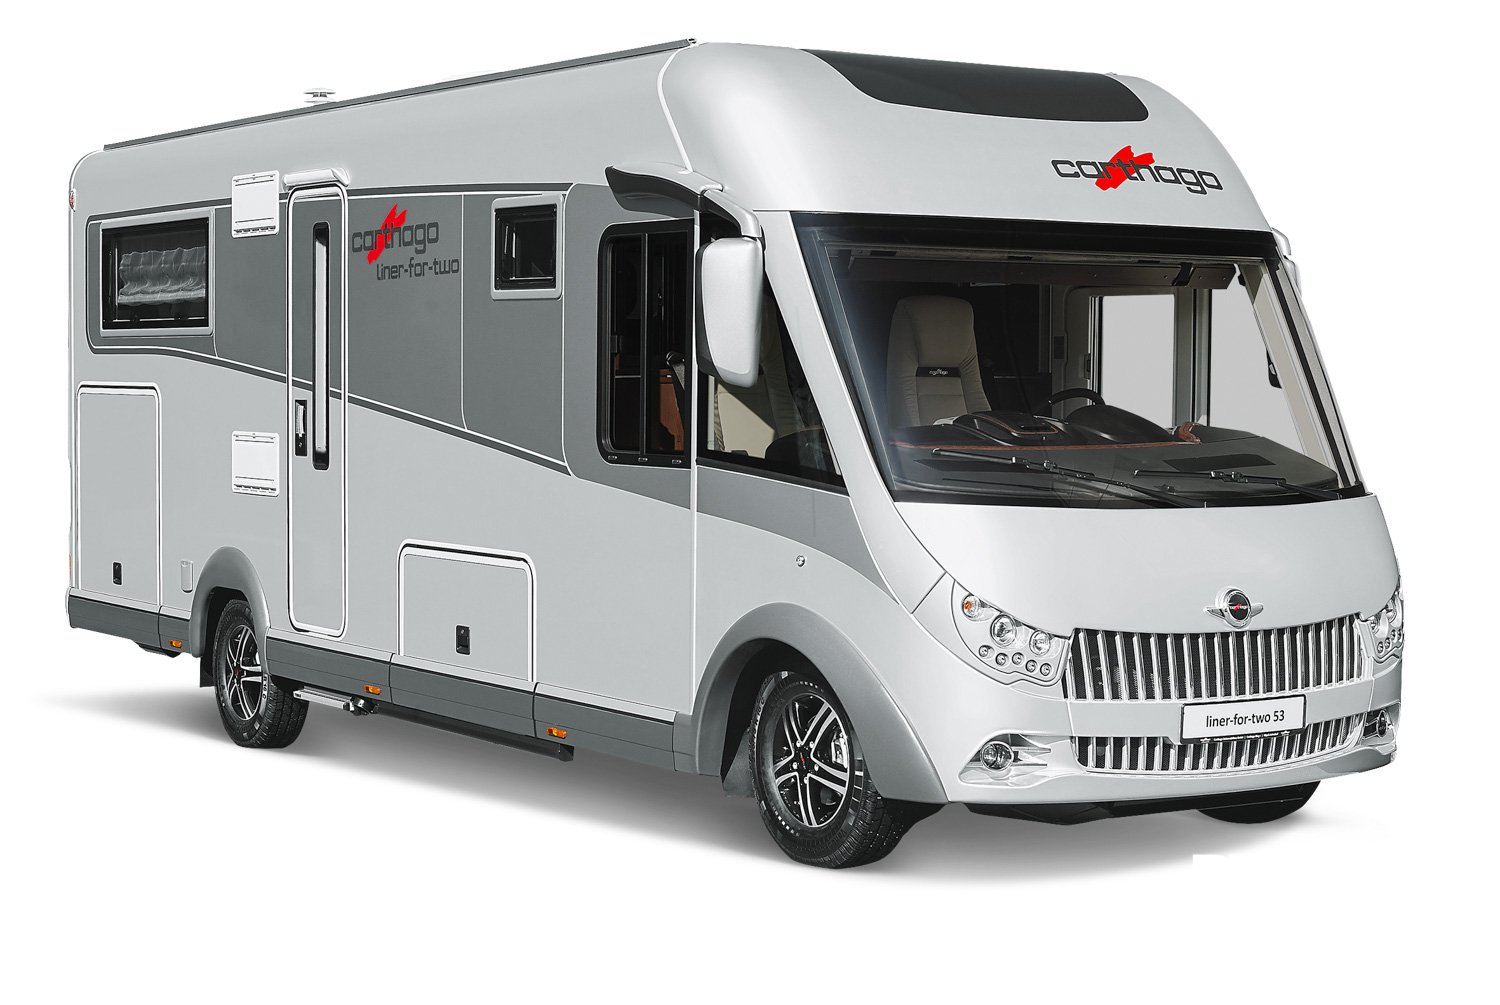 The 180hp Fiat Ducato on the heavy duty ALKO chassis is packed with features. Big garage storage and locker storage accessible outside and in The seat lifts up to accommodate high items, such as bike handle or similar